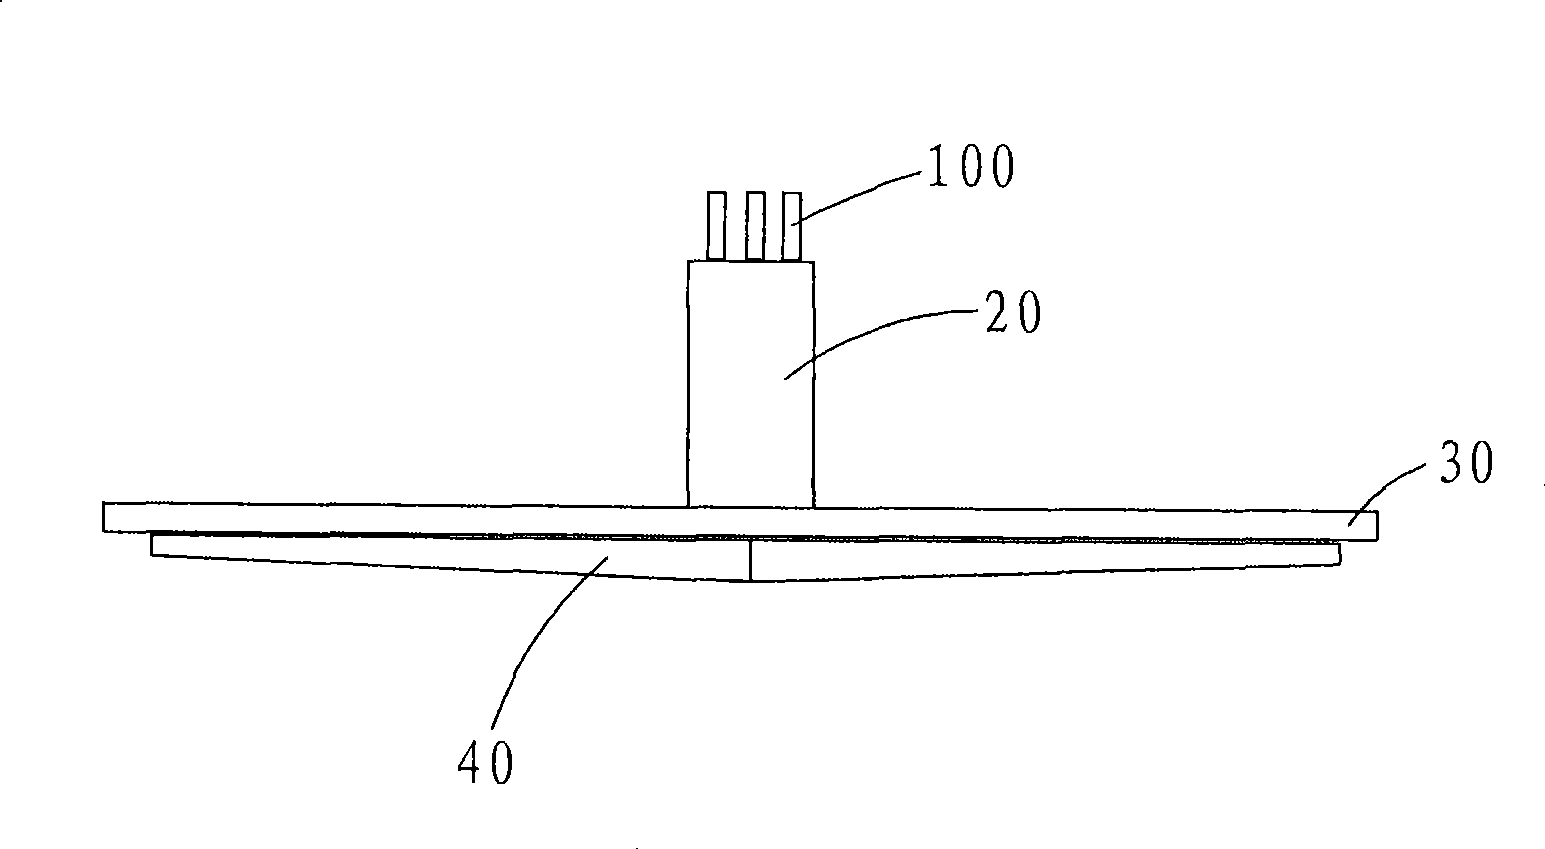 Nozzle system capable of continuously evening chemical vapour deposition of large area